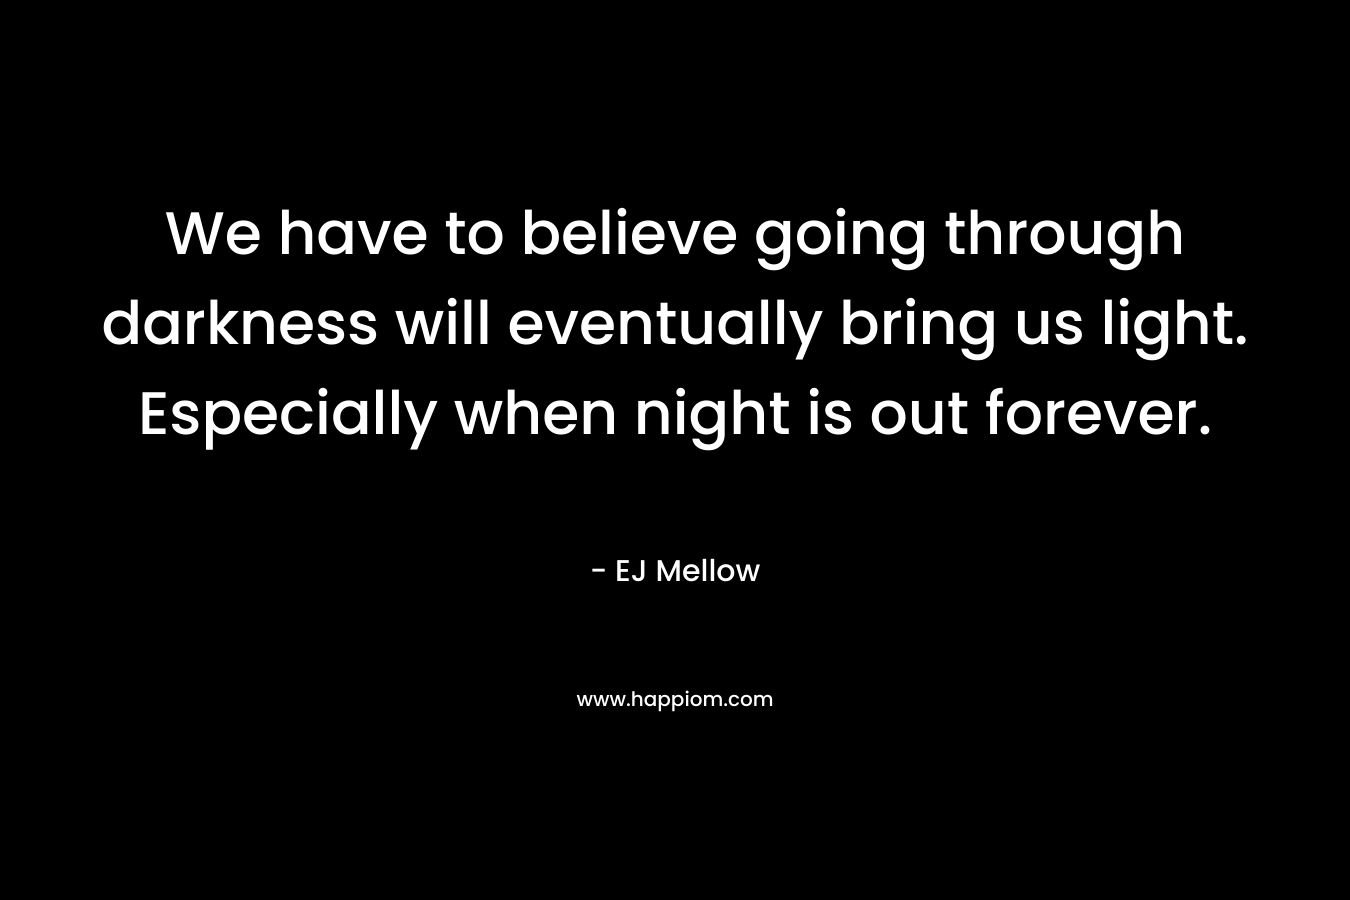 We have to believe going through darkness will eventually bring us light. Especially when night is out forever.